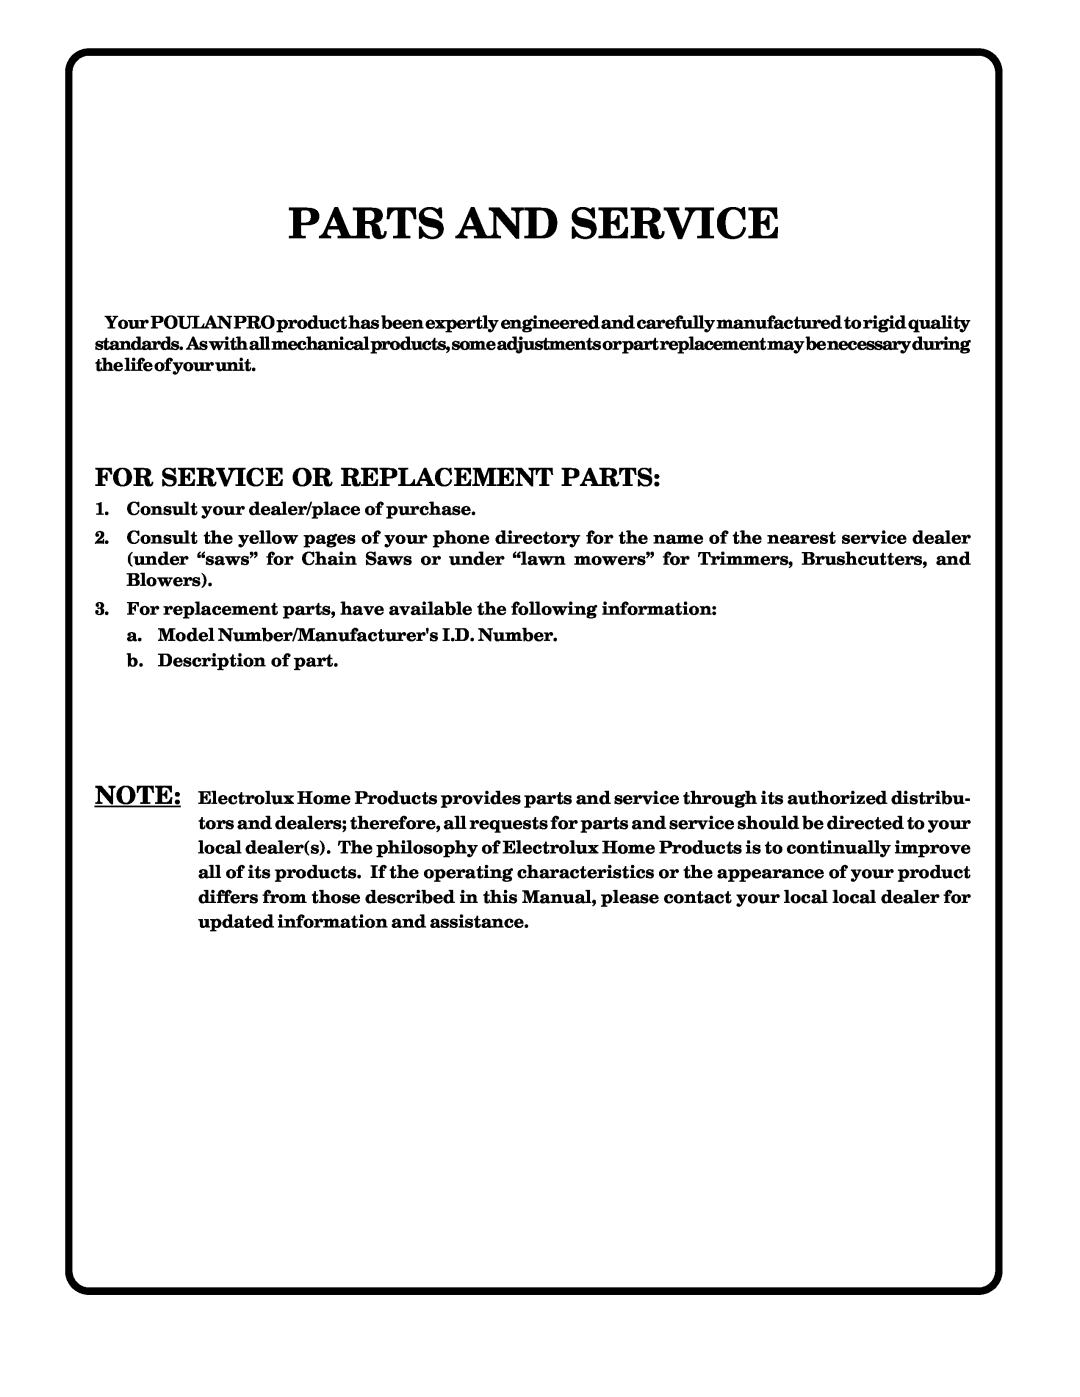 Poulan PRK17H42STA owner manual Parts And Service, For Service Or Replacement Parts 